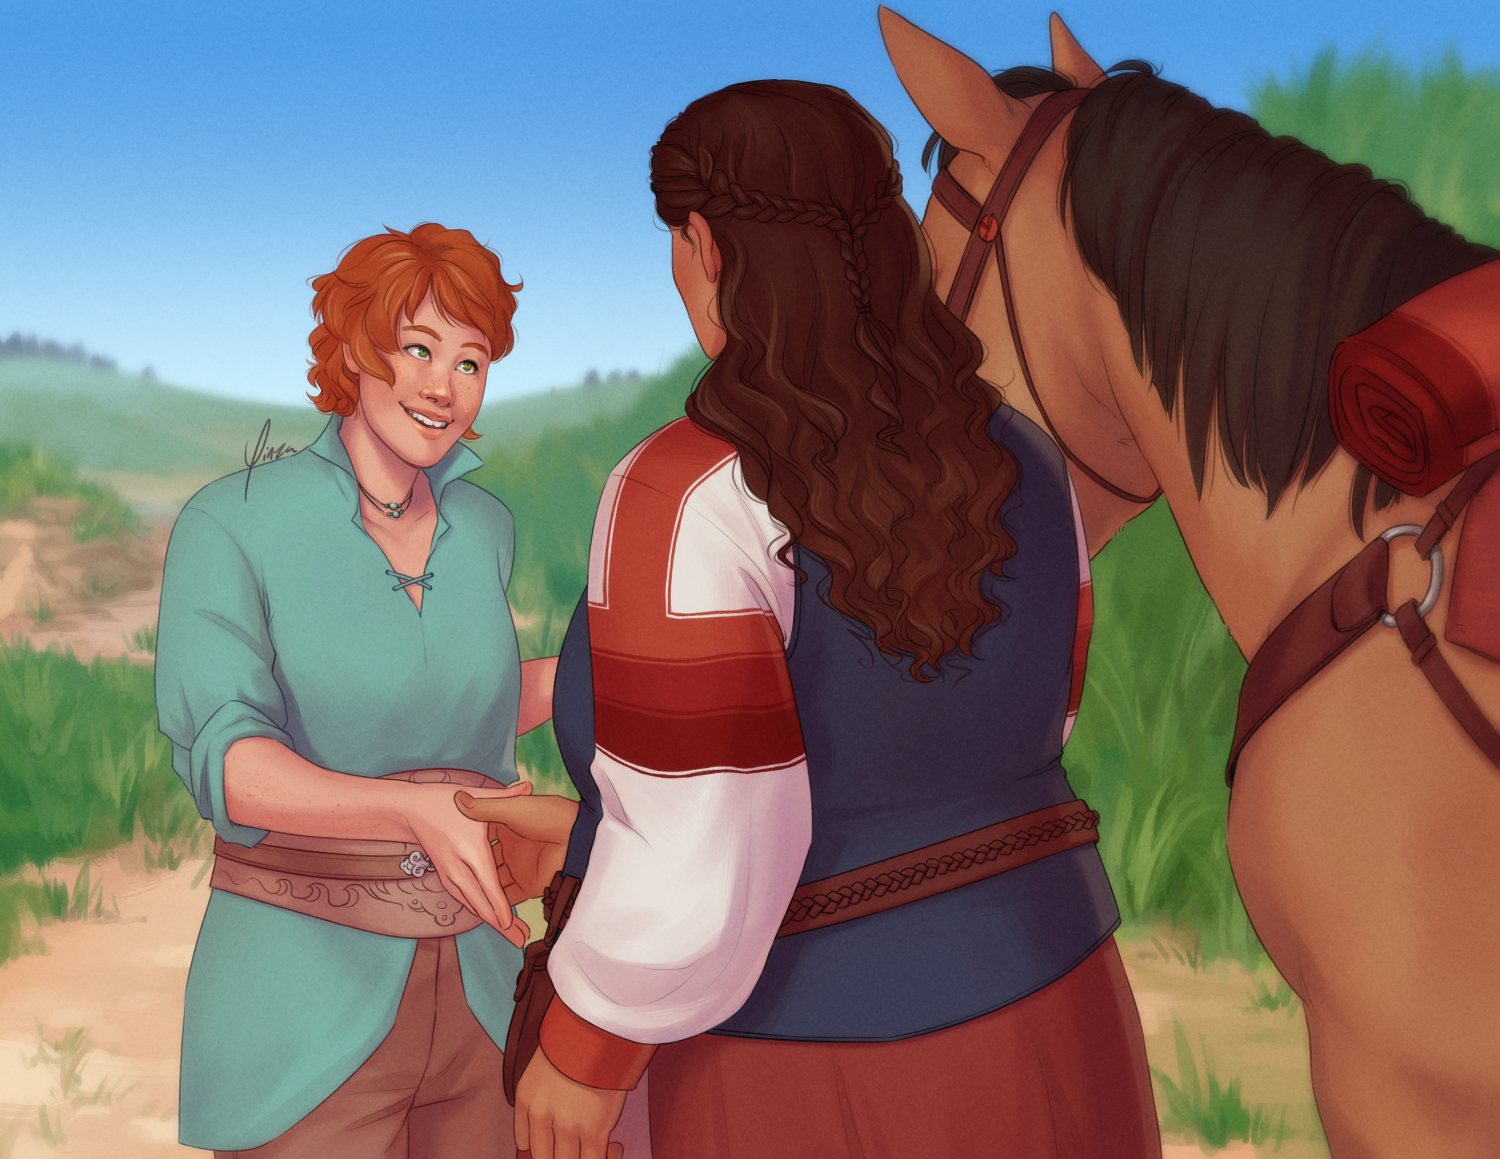 Digital artwork of two women shaking hands, shown from the waist up. They stand amid rolling grassy hills on a sunny day. The woman with her back to the viewer is tall and heavyset, with light brown skin and long wavy brown hair tied back from her face with side braids. She wears a dark blue vest over a white blouse with red-orange stripes along the sleeves and a reddish-brown skirt. A saddled dun horse stands to her right. Opposite her is a petite woman with light freckled skin and short wavy red hair. She wears a wide brown belt over a light turquoise blouse and brown pants. She is the one initiating the handshake, and looks into the other woman’s face with a bright smile.